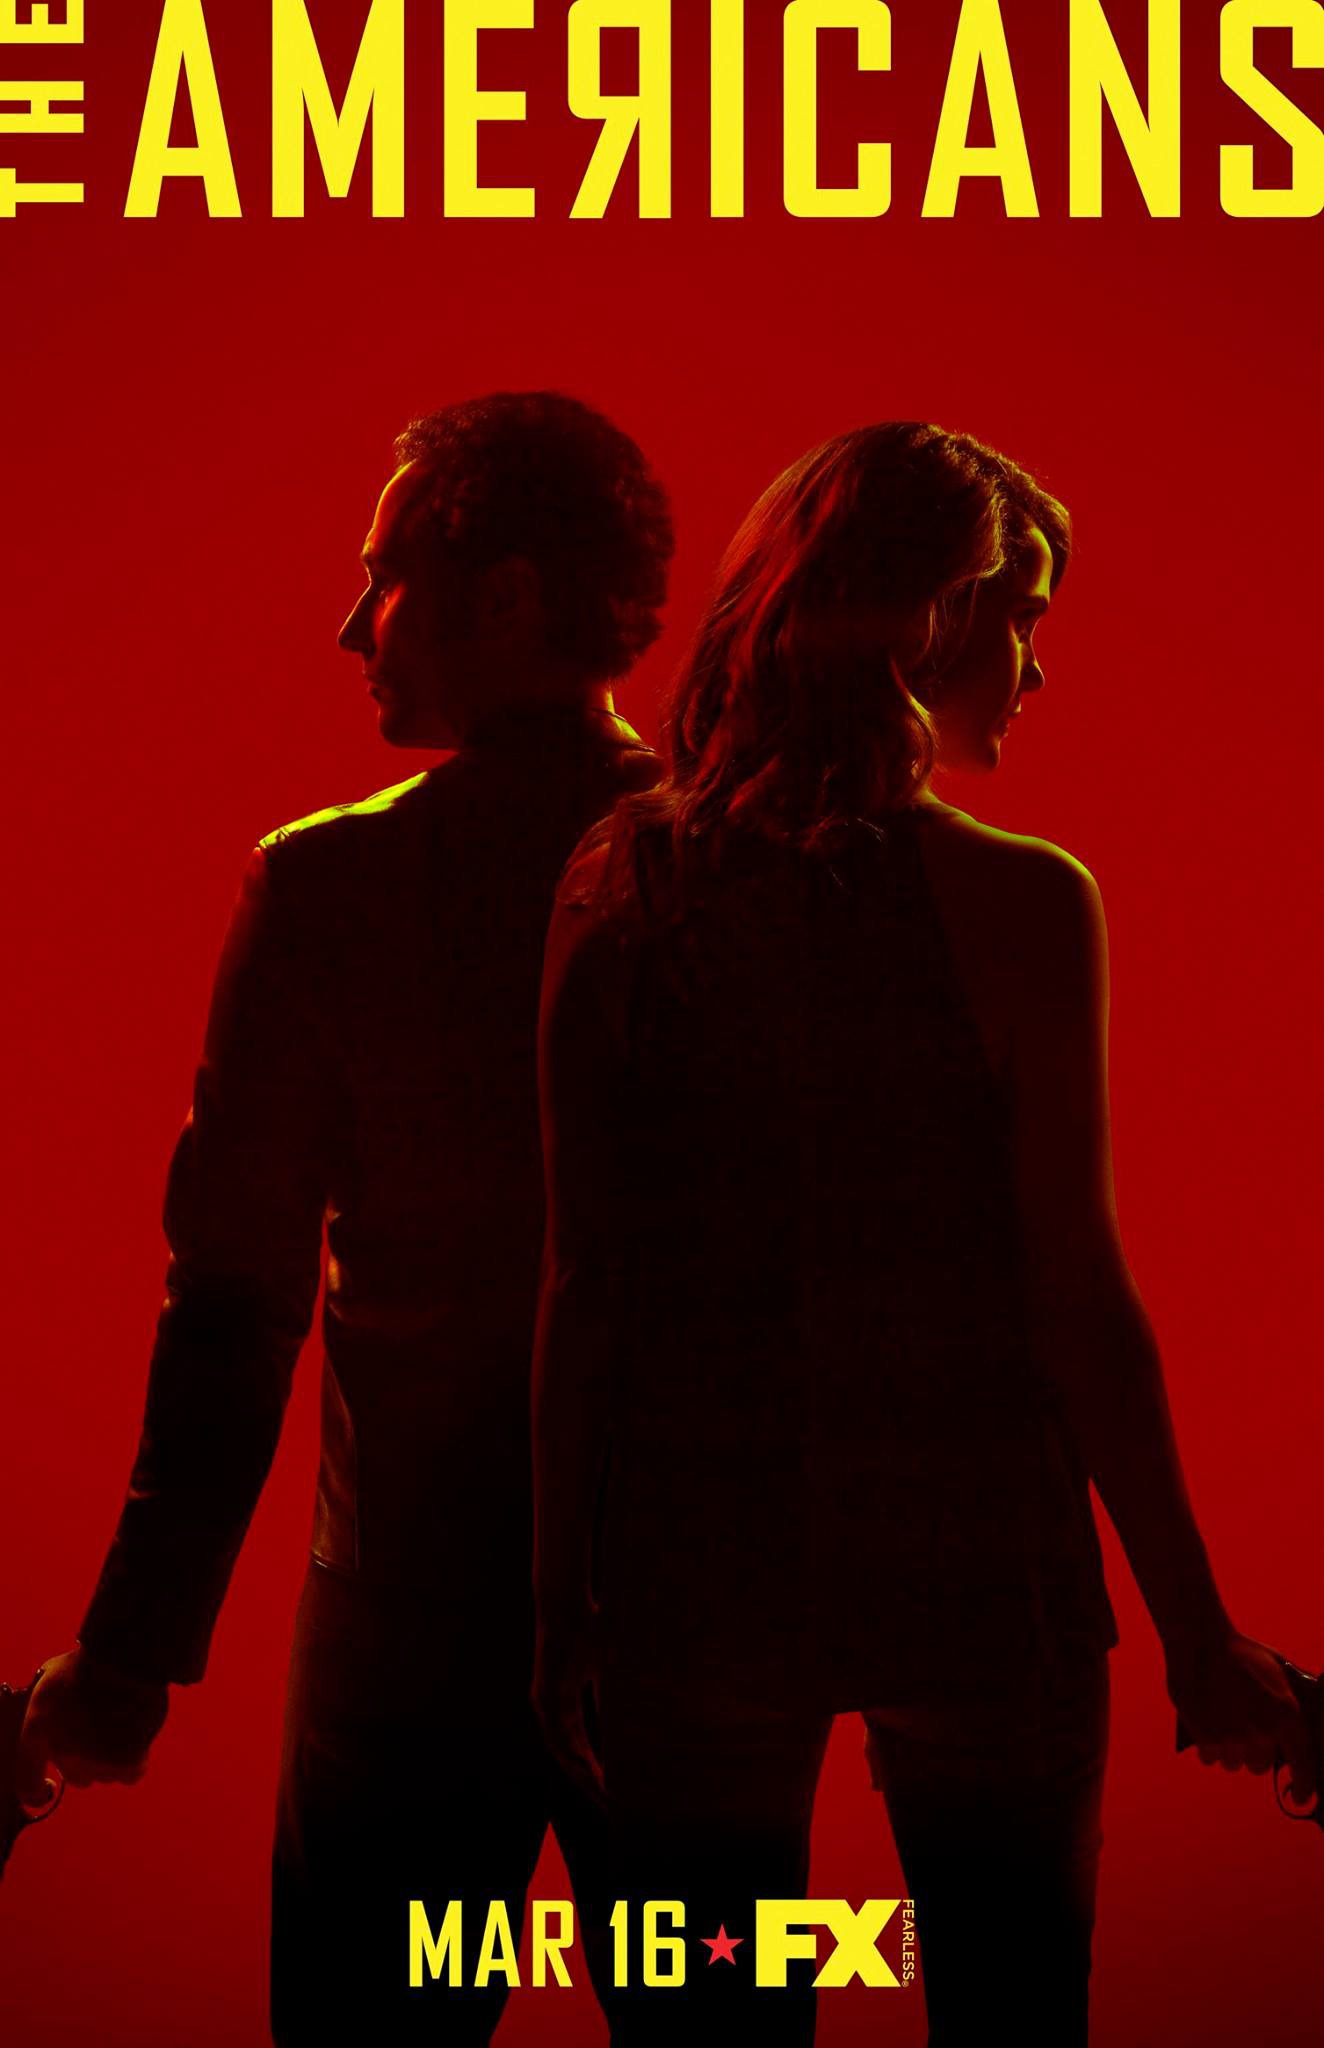 Mega Sized TV Poster Image for The Americans (#12 of 16)